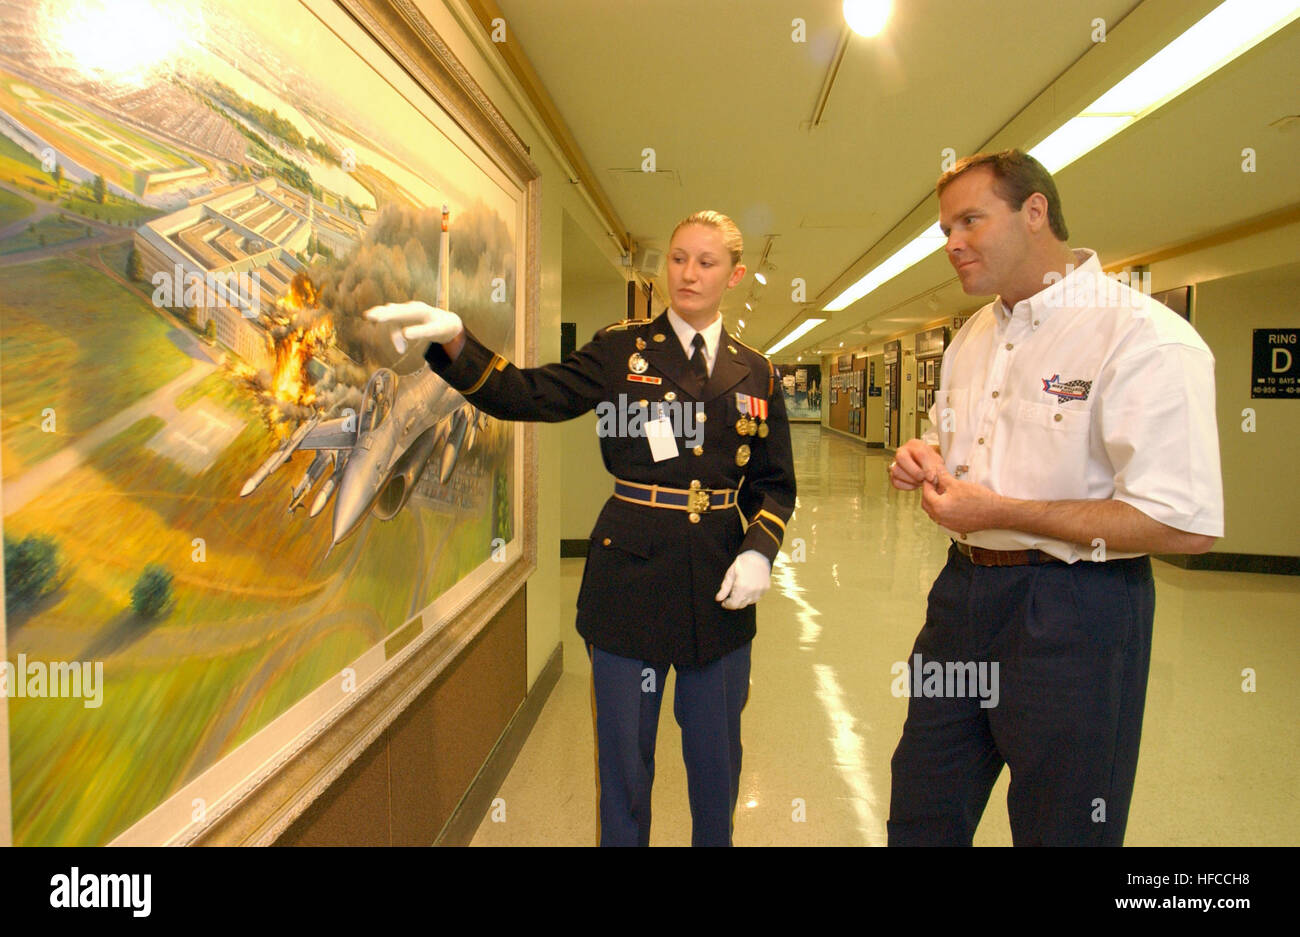 021105-N-2383B-533 Pentagon, Arlington, Va. (Nov. 5, 2002) -- U.S. Army Honor Guard, Specialist Camille Adams, a Pentagon tour guide, shows visiting NASCAR race driver Mike Wallace a new painting depicting the first fighter aircraft responding to the attack on the Pentagon, September 11, 2001.  Mike Wallace flew in from North Carolina to spend a day visiting with members of the U.S. Armed Forces, as a gesture of his support for the military.  U.S. Navy photo by Chief Photographer's Mate Johnny Bivera.  (RELEASED) Mike Wallace Pentagon Stock Photo